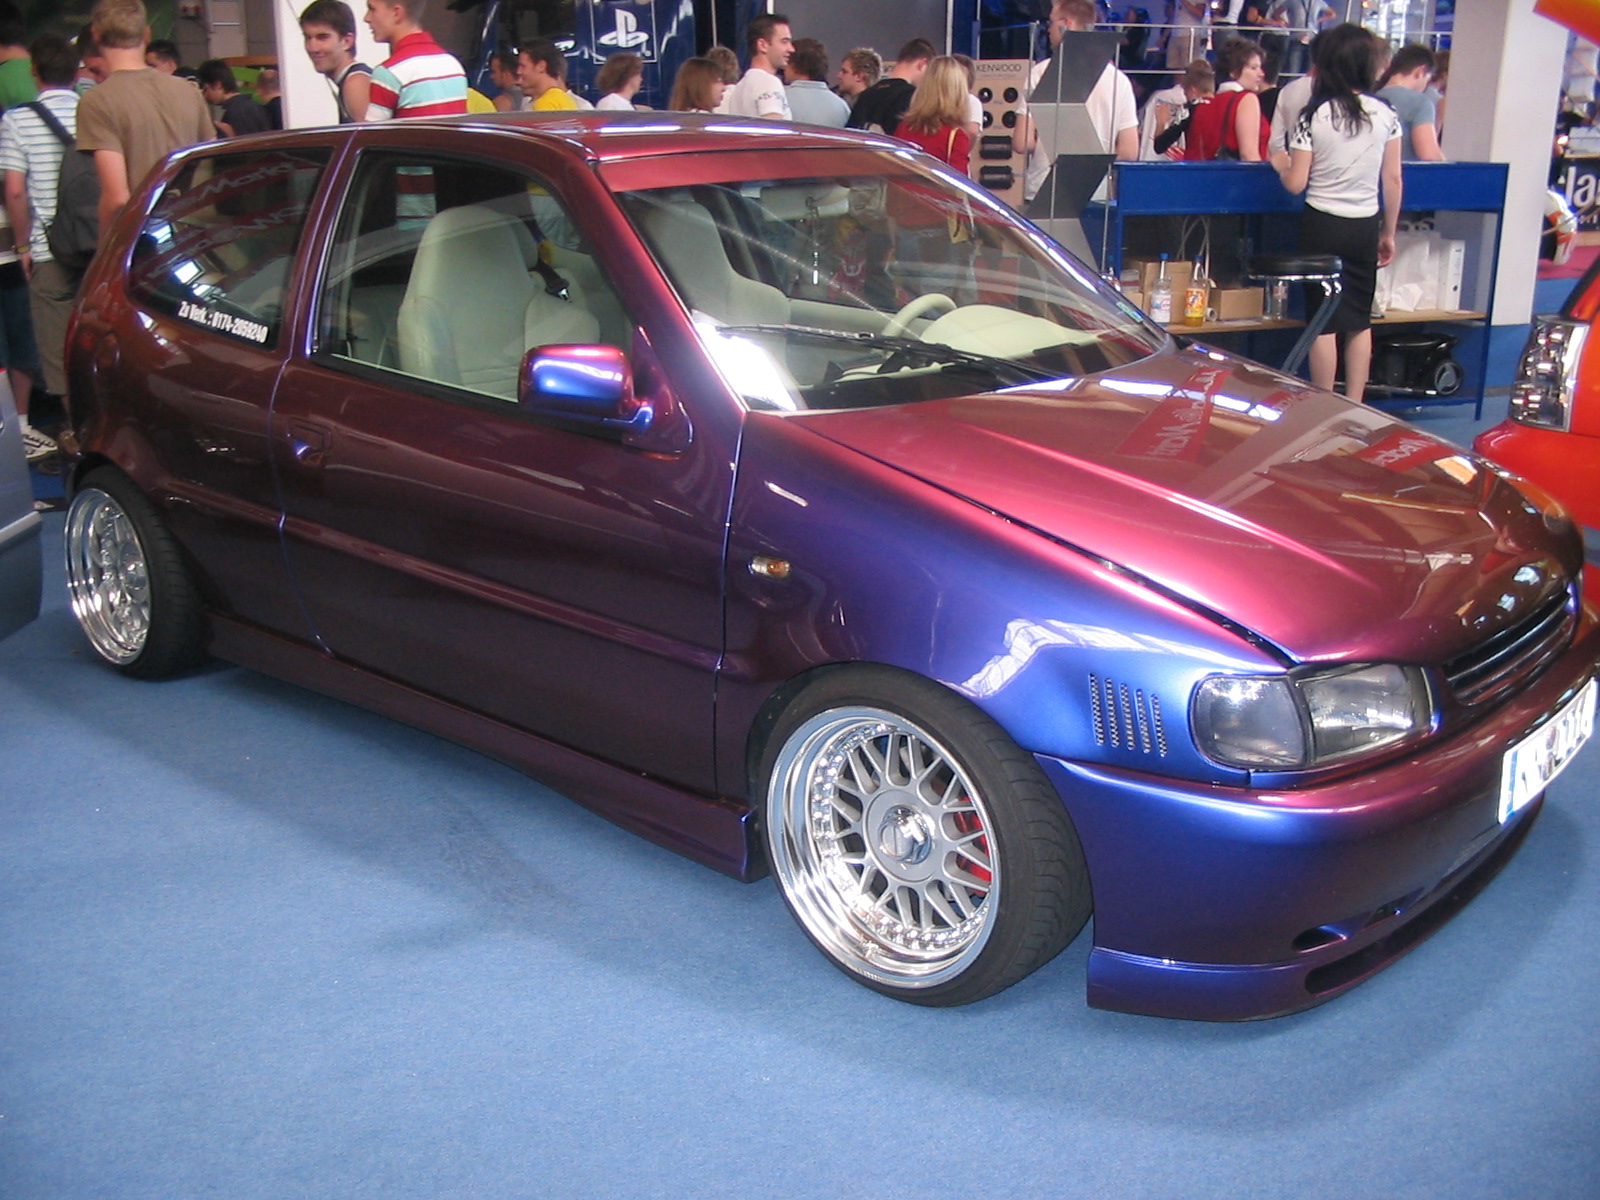 Anhang ID 3708 - Tuning World Bodensee 2005 005.jpg